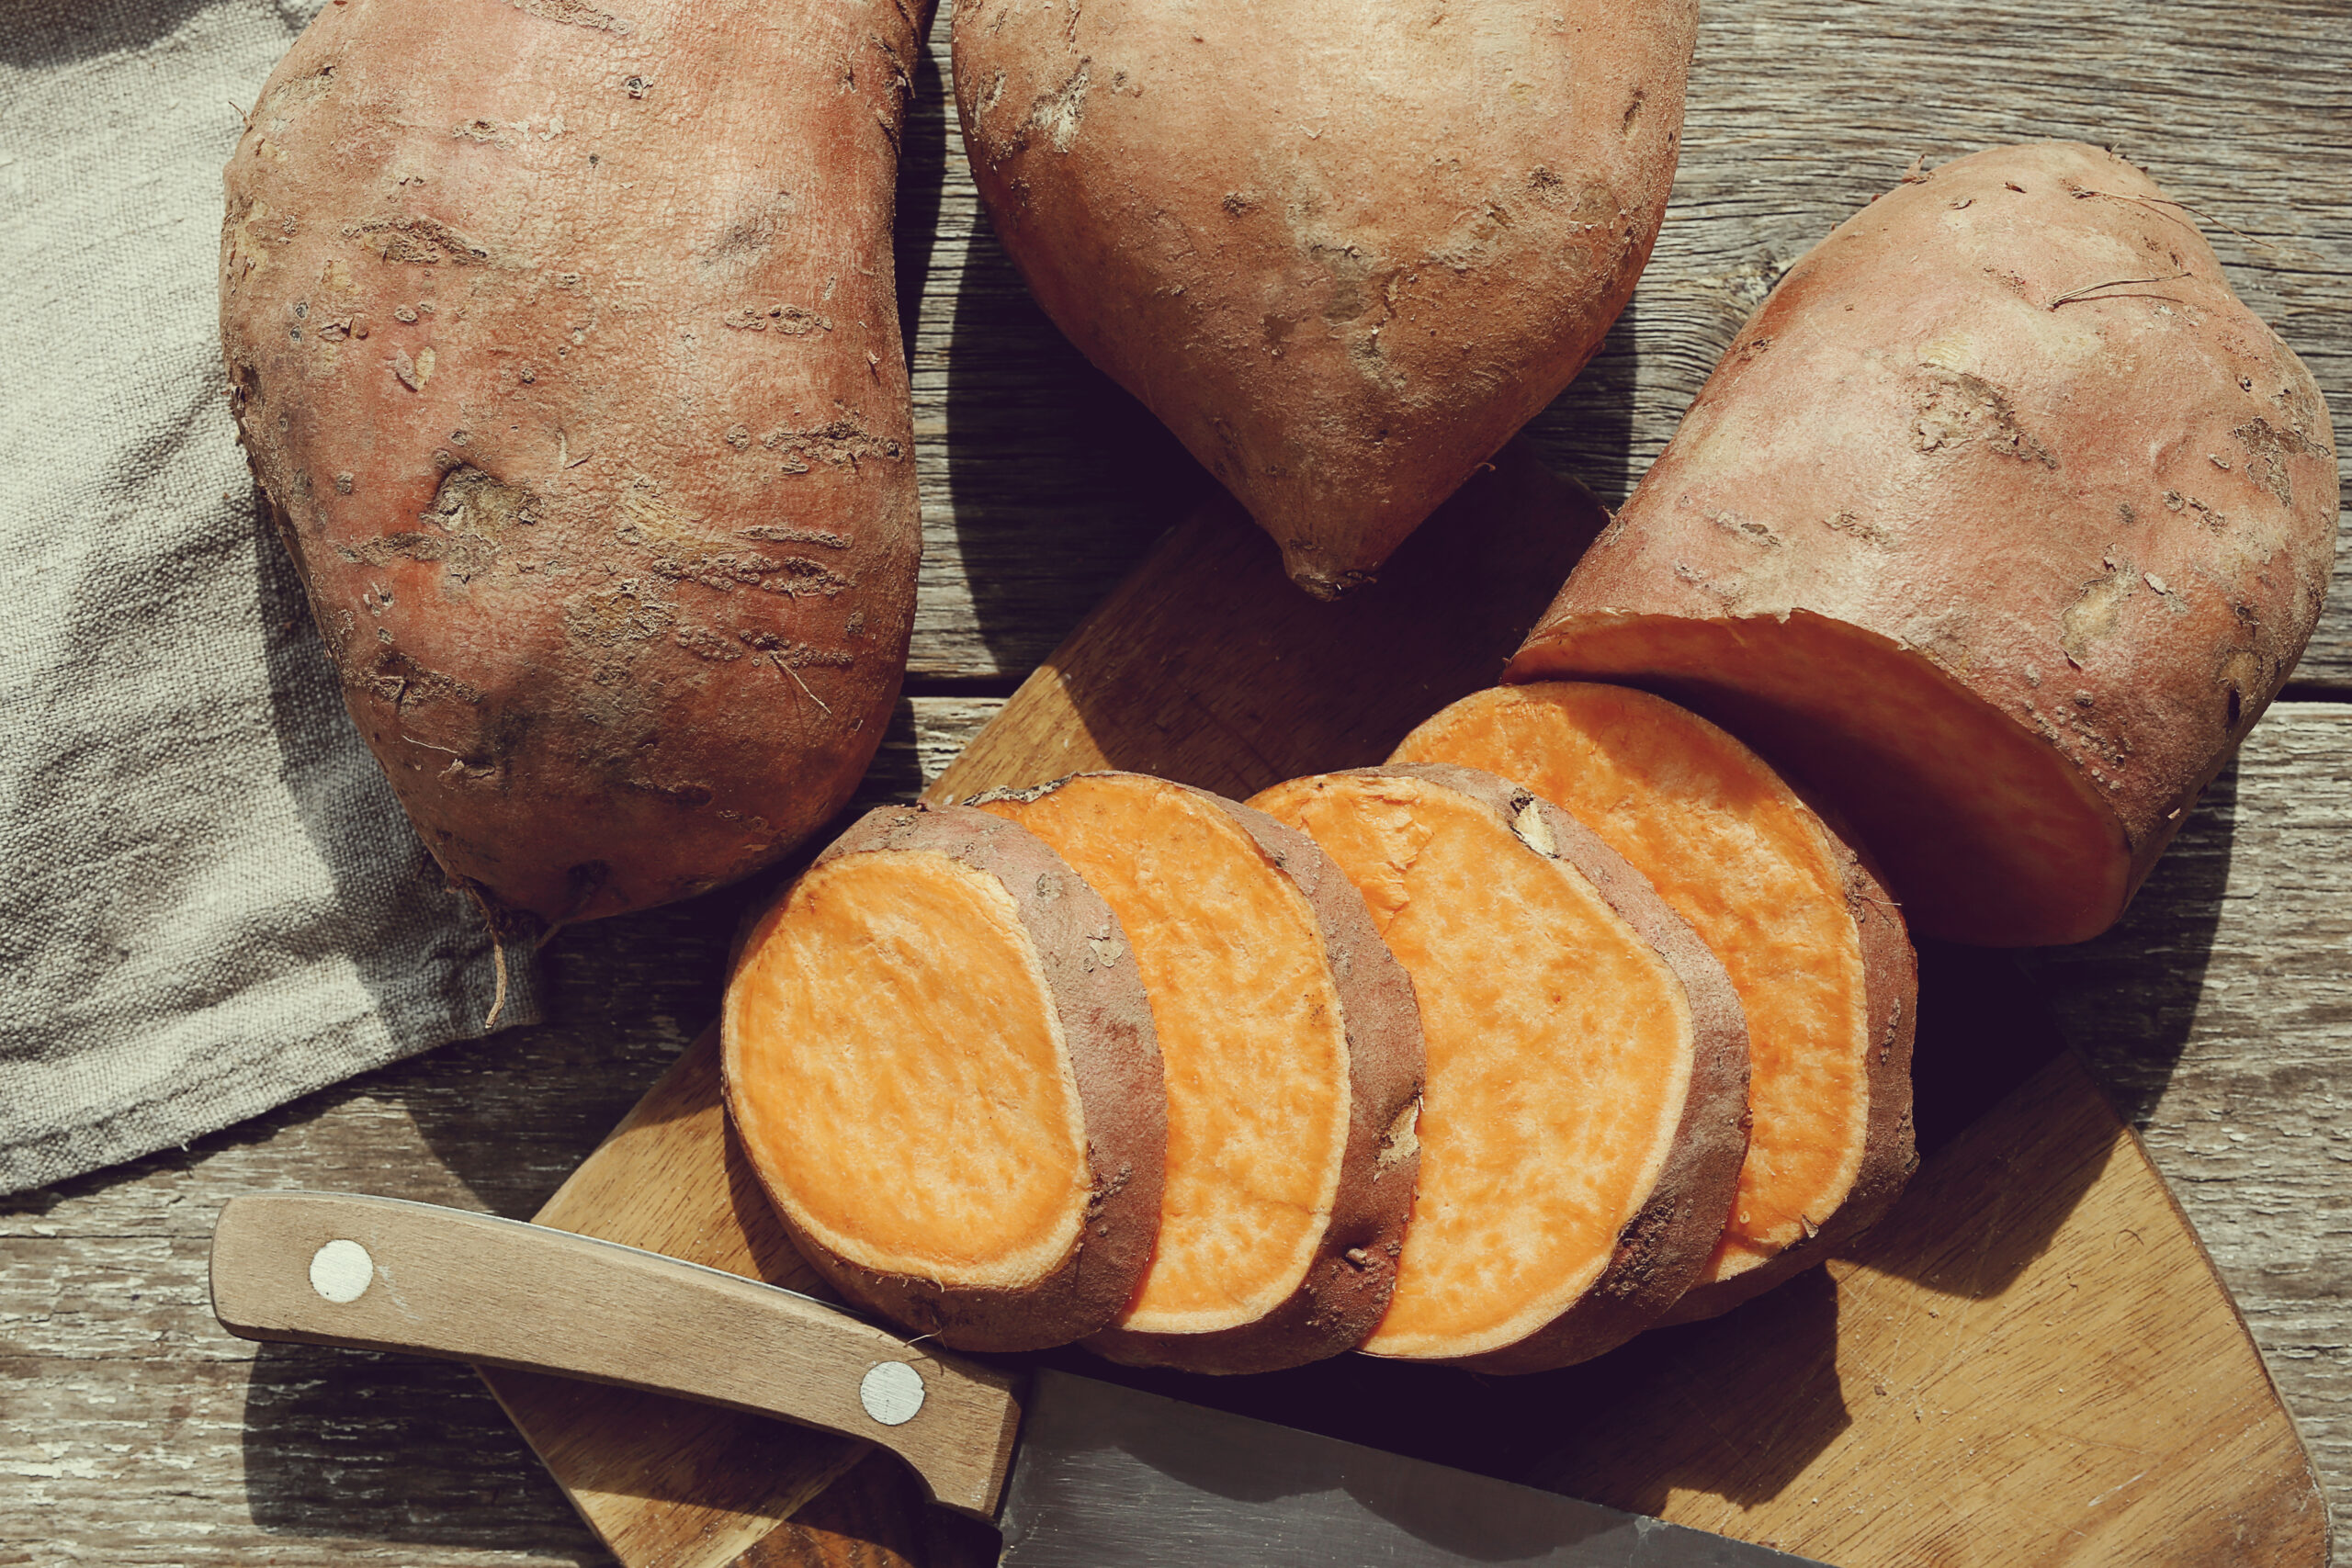 Sweet potato on the wooden table | https://fruitsauction.com/